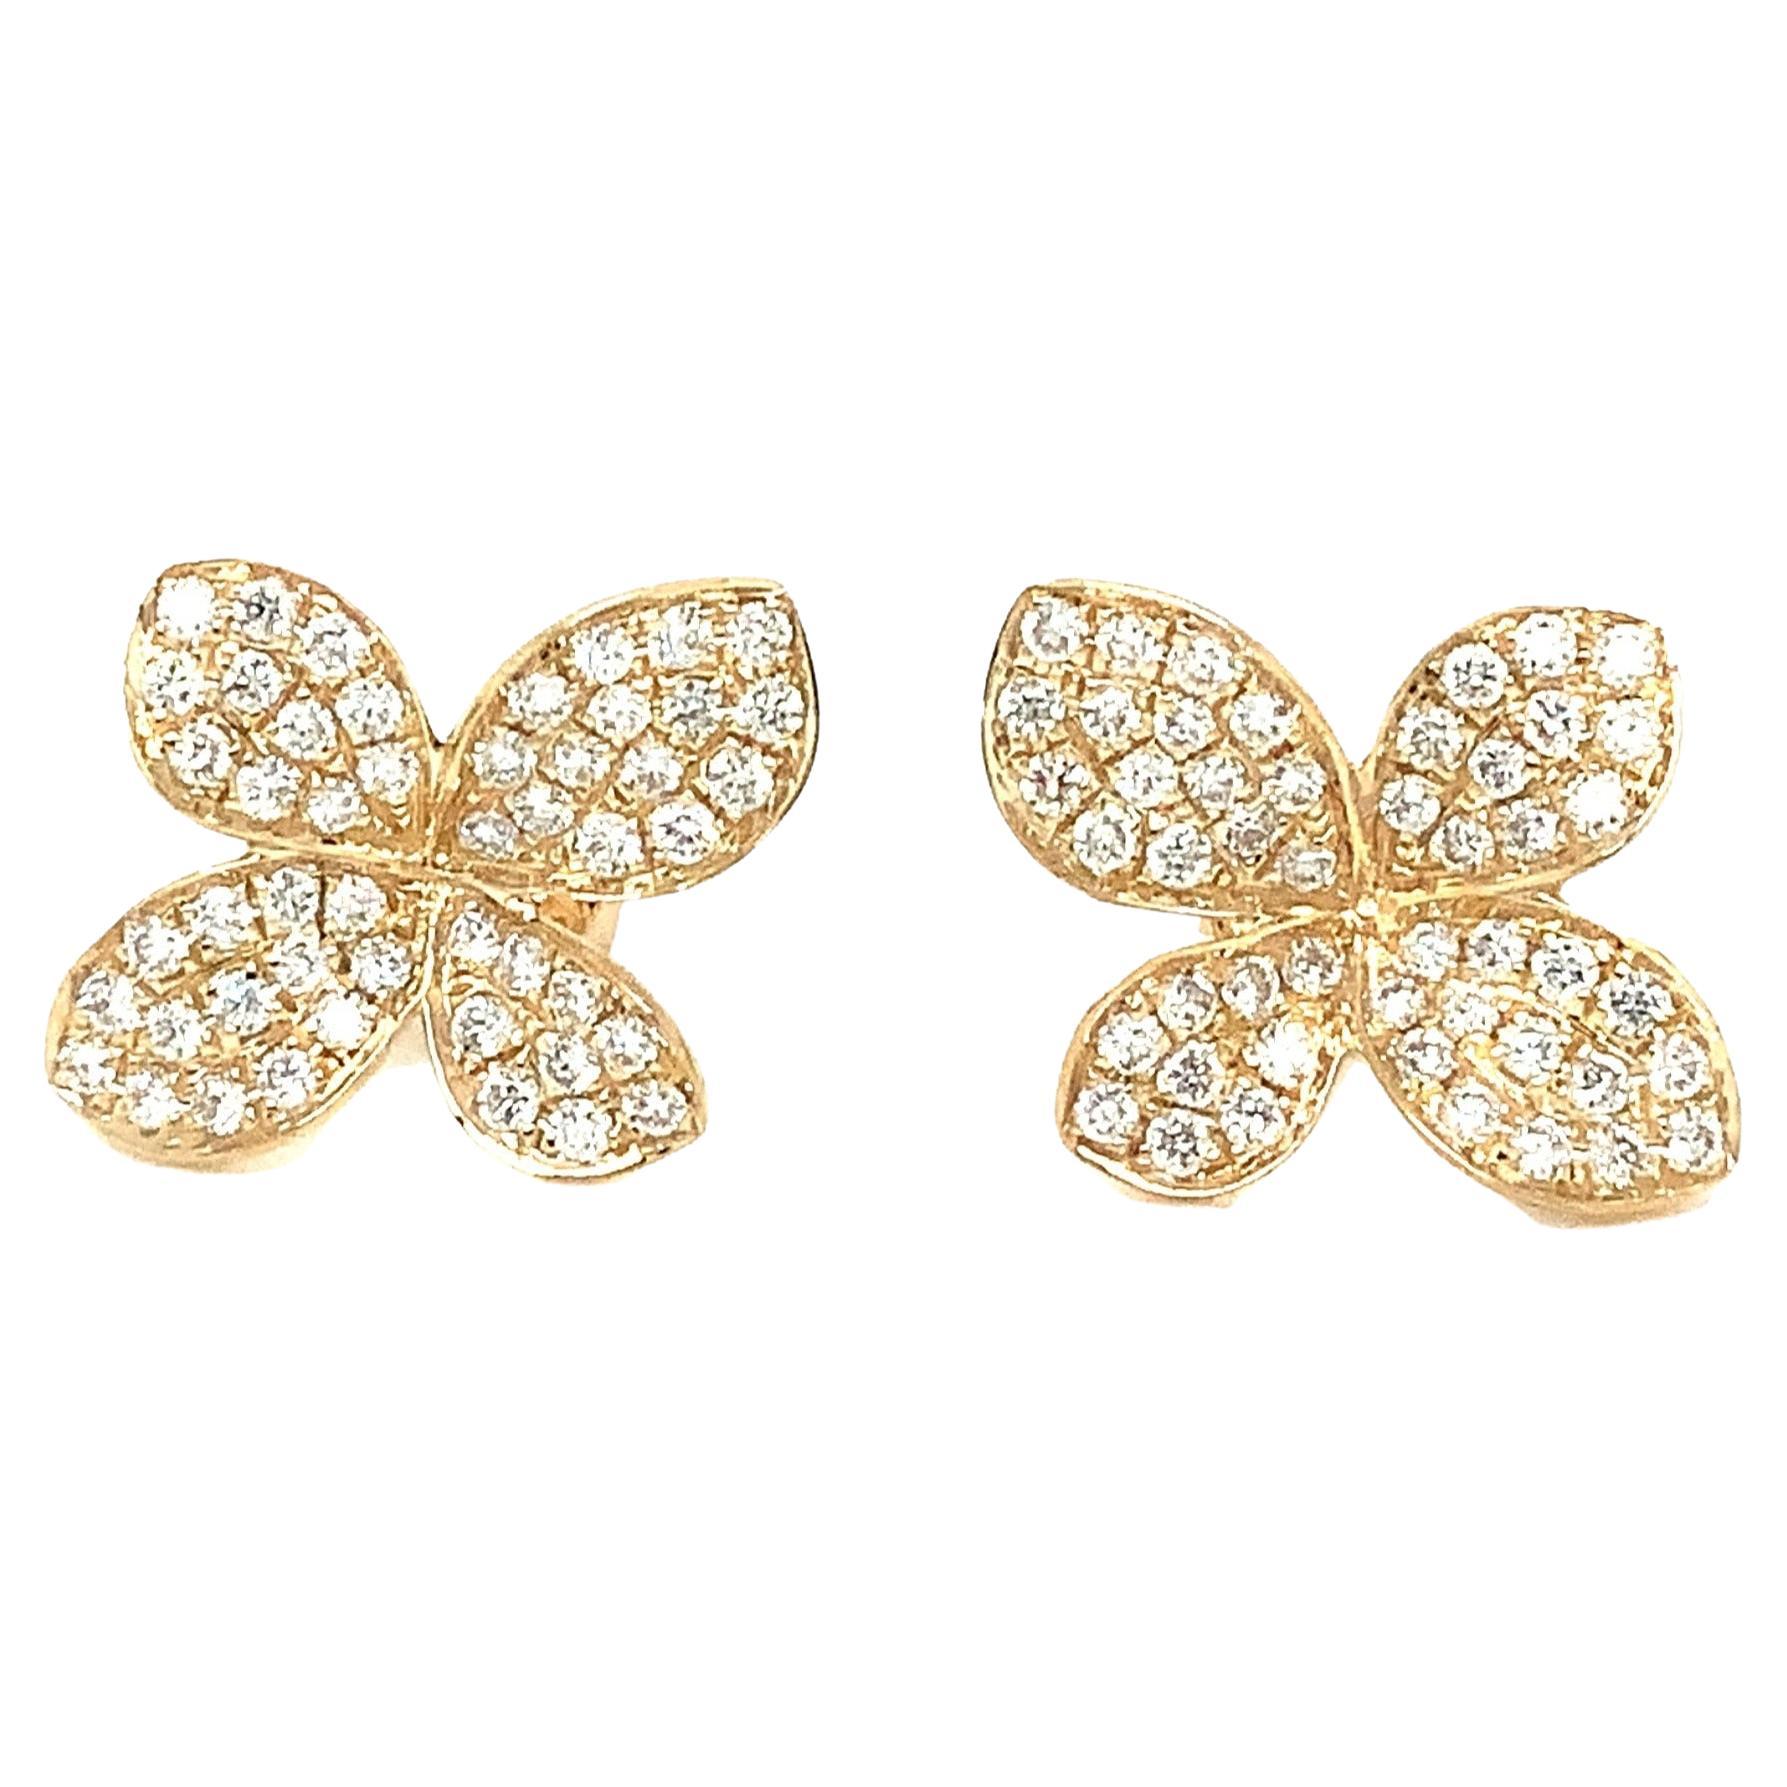 Afarin Collection Pavé Petite Garden Diamond Earrings in 18 Kt Yellow Gold For Sale